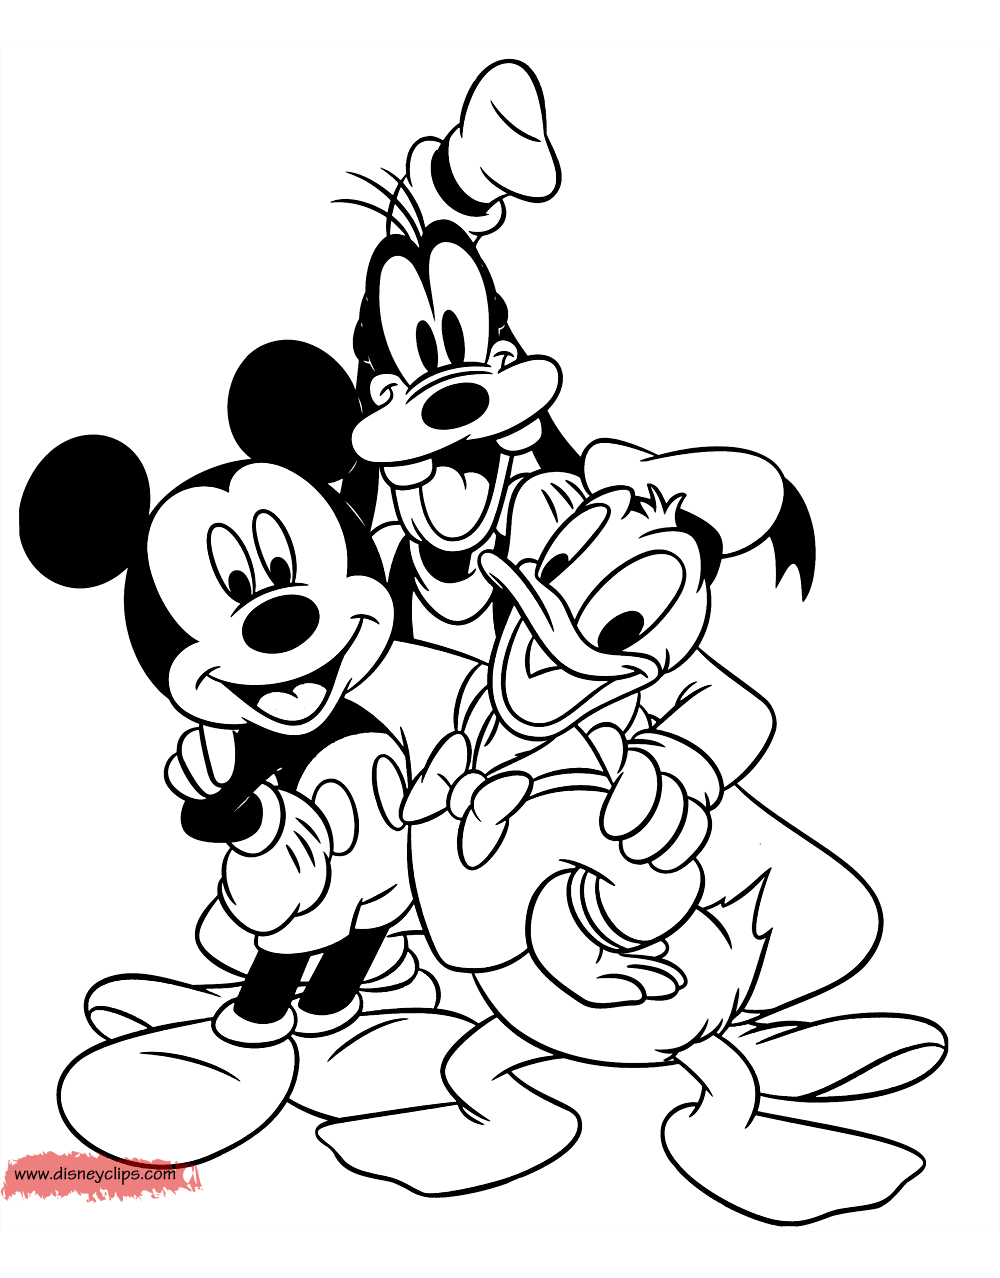 Happy Birthday Coloring Pages For Friends Coloring Pages Mickey Minnie Mouse Coloring Pages Clubhouse